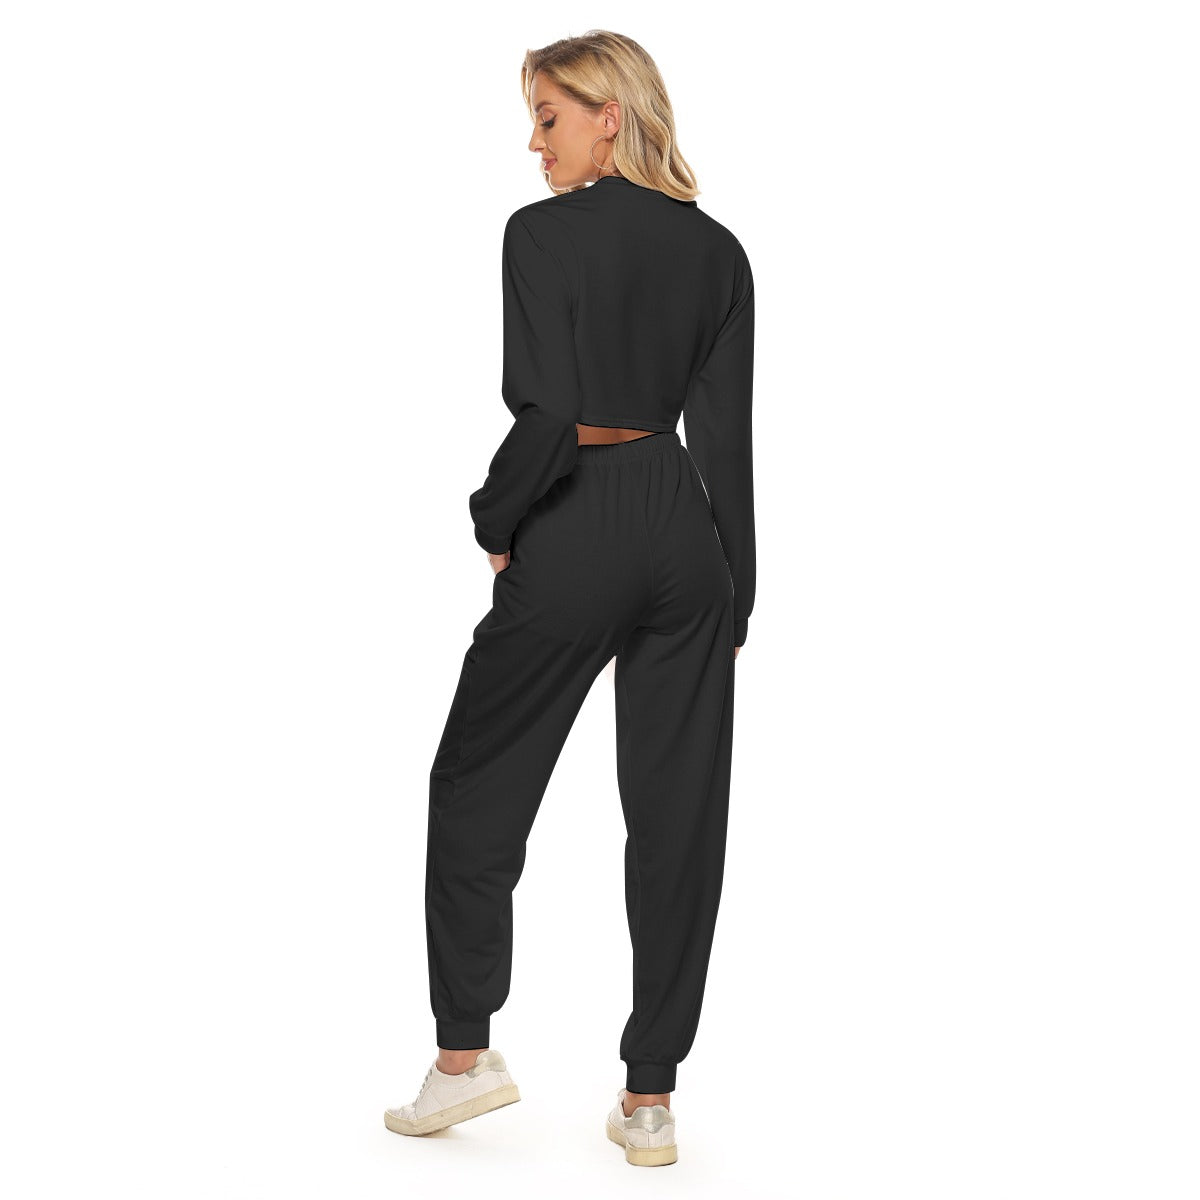 KERB DJ KERBY on the One's and Two's  Women's Crop Sweatshirt Suit